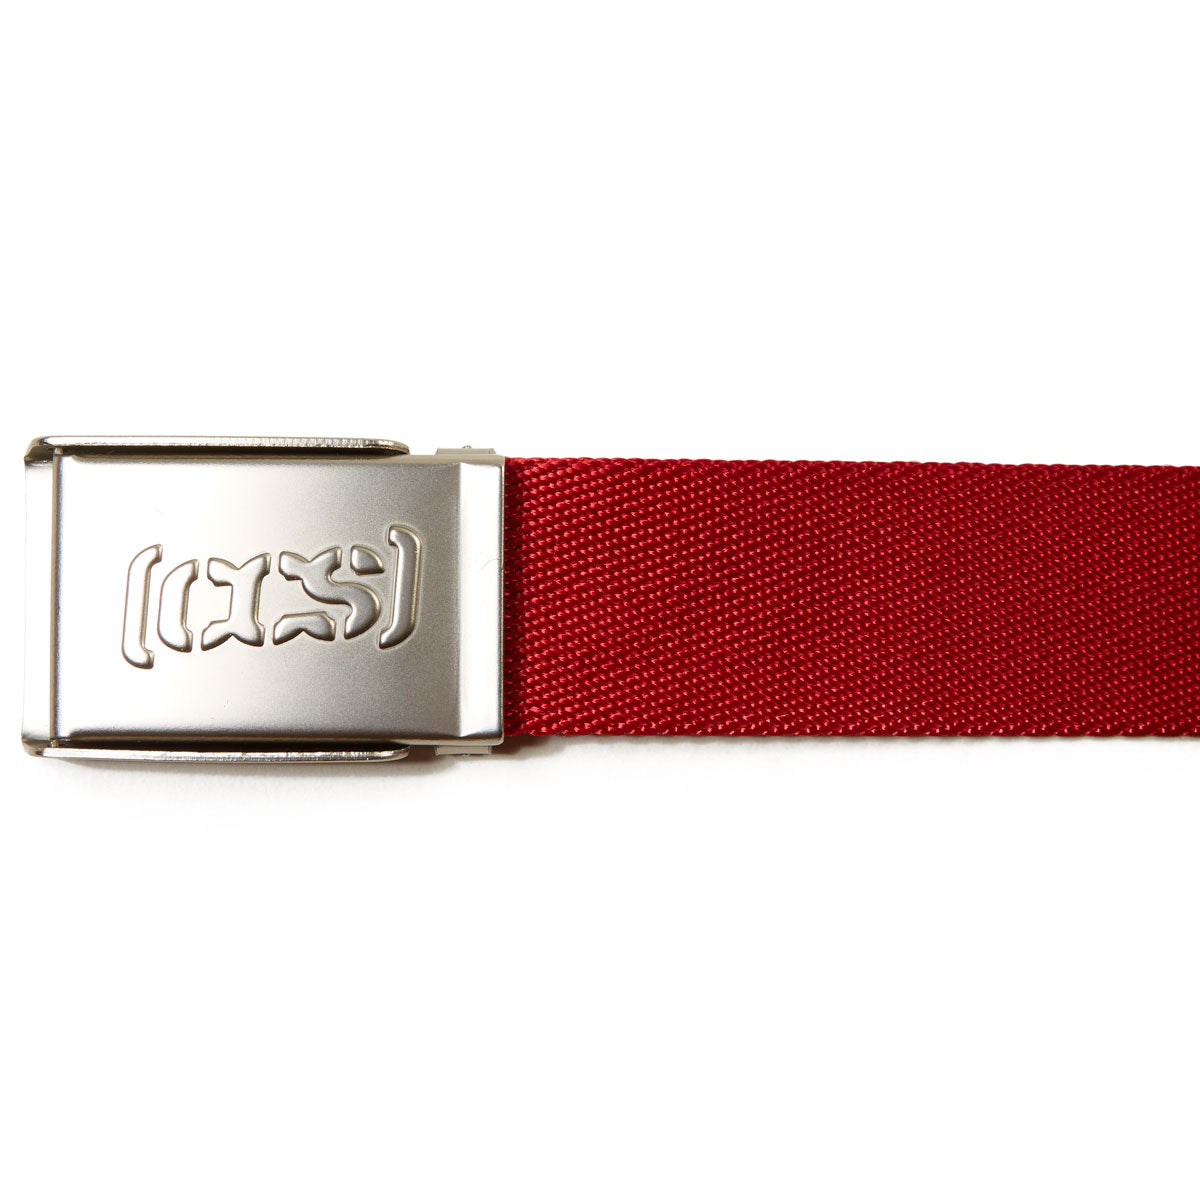 CCS Silver Logo Buckle Belt - Red image 3